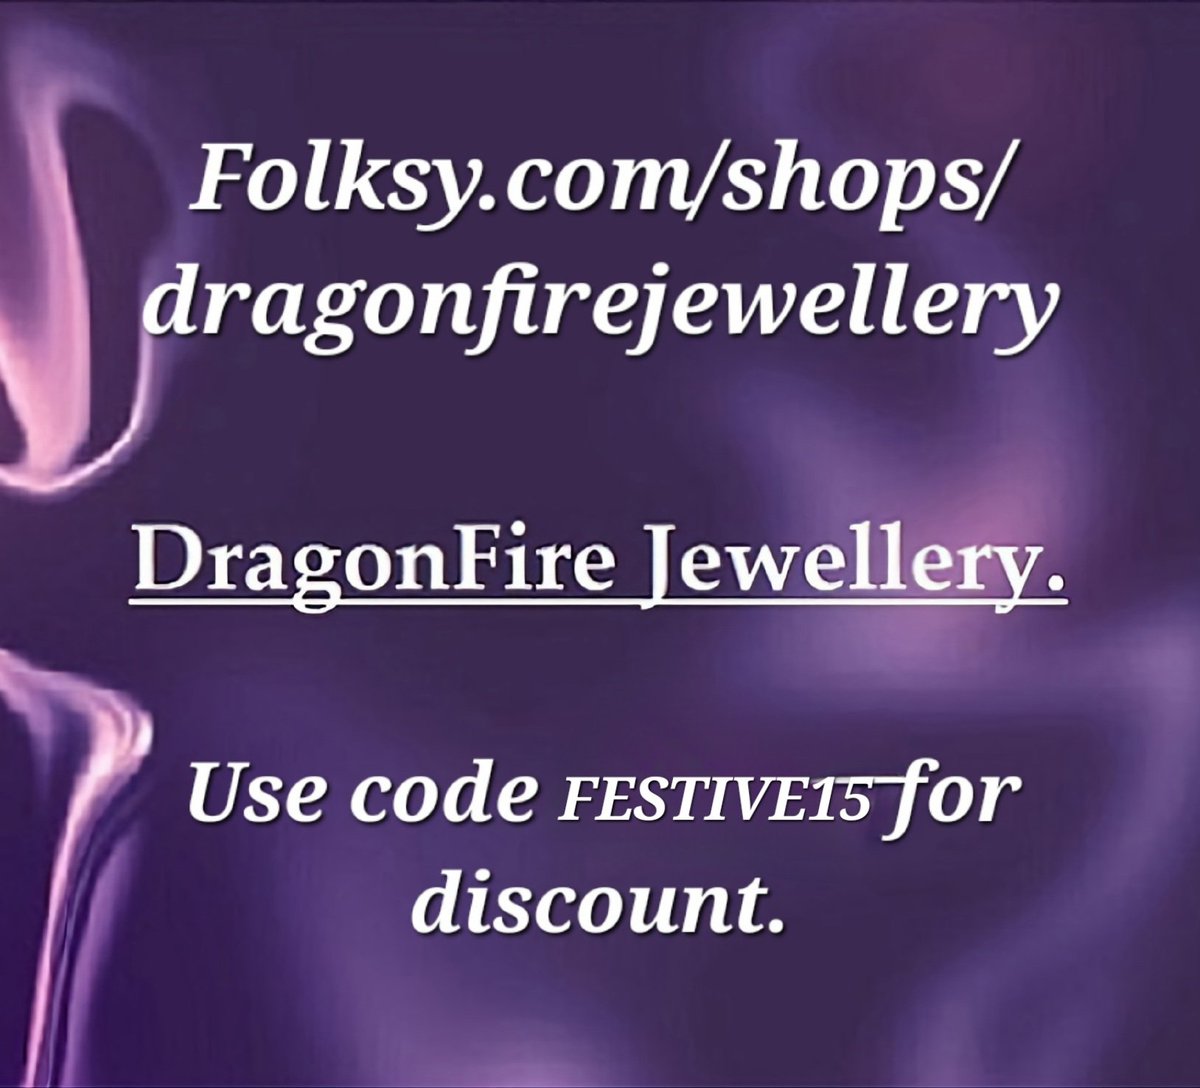 Use code FESTIVE15 on my Folksy shop for discount.

Folksy.com/shops/dragonfi… 

#handmade #jewellery #jewelry #ForeverFlorals #resinart #gifts #unique #unusual #dragonfirejewellery #FolksyShop #MHHSBD #UKmakers